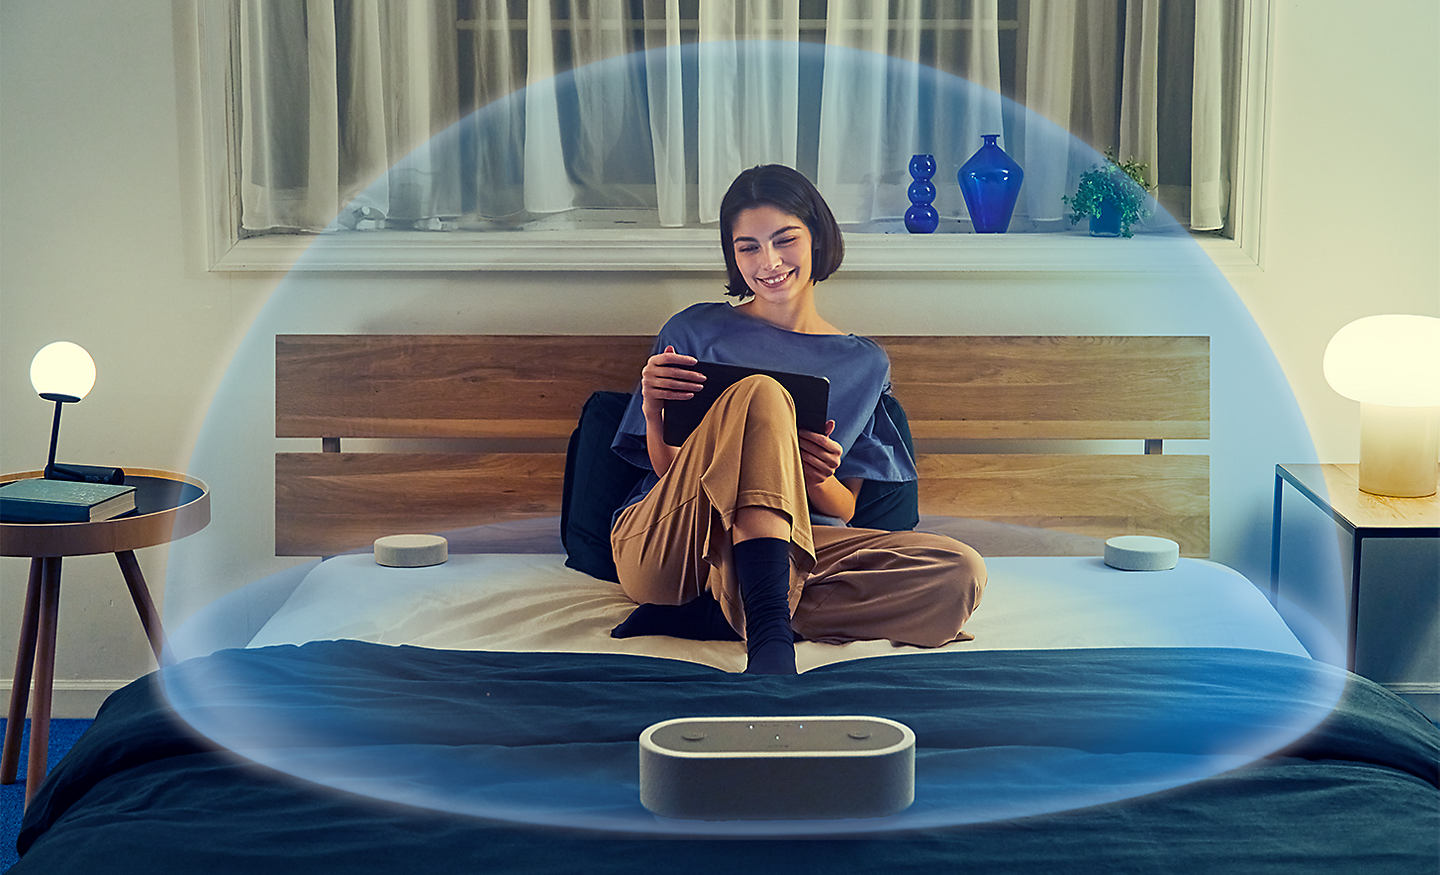 Image of a person sitting on a bed surrounded by the HT-AX7 and a transparent bubble encapsulating them with spatial sound